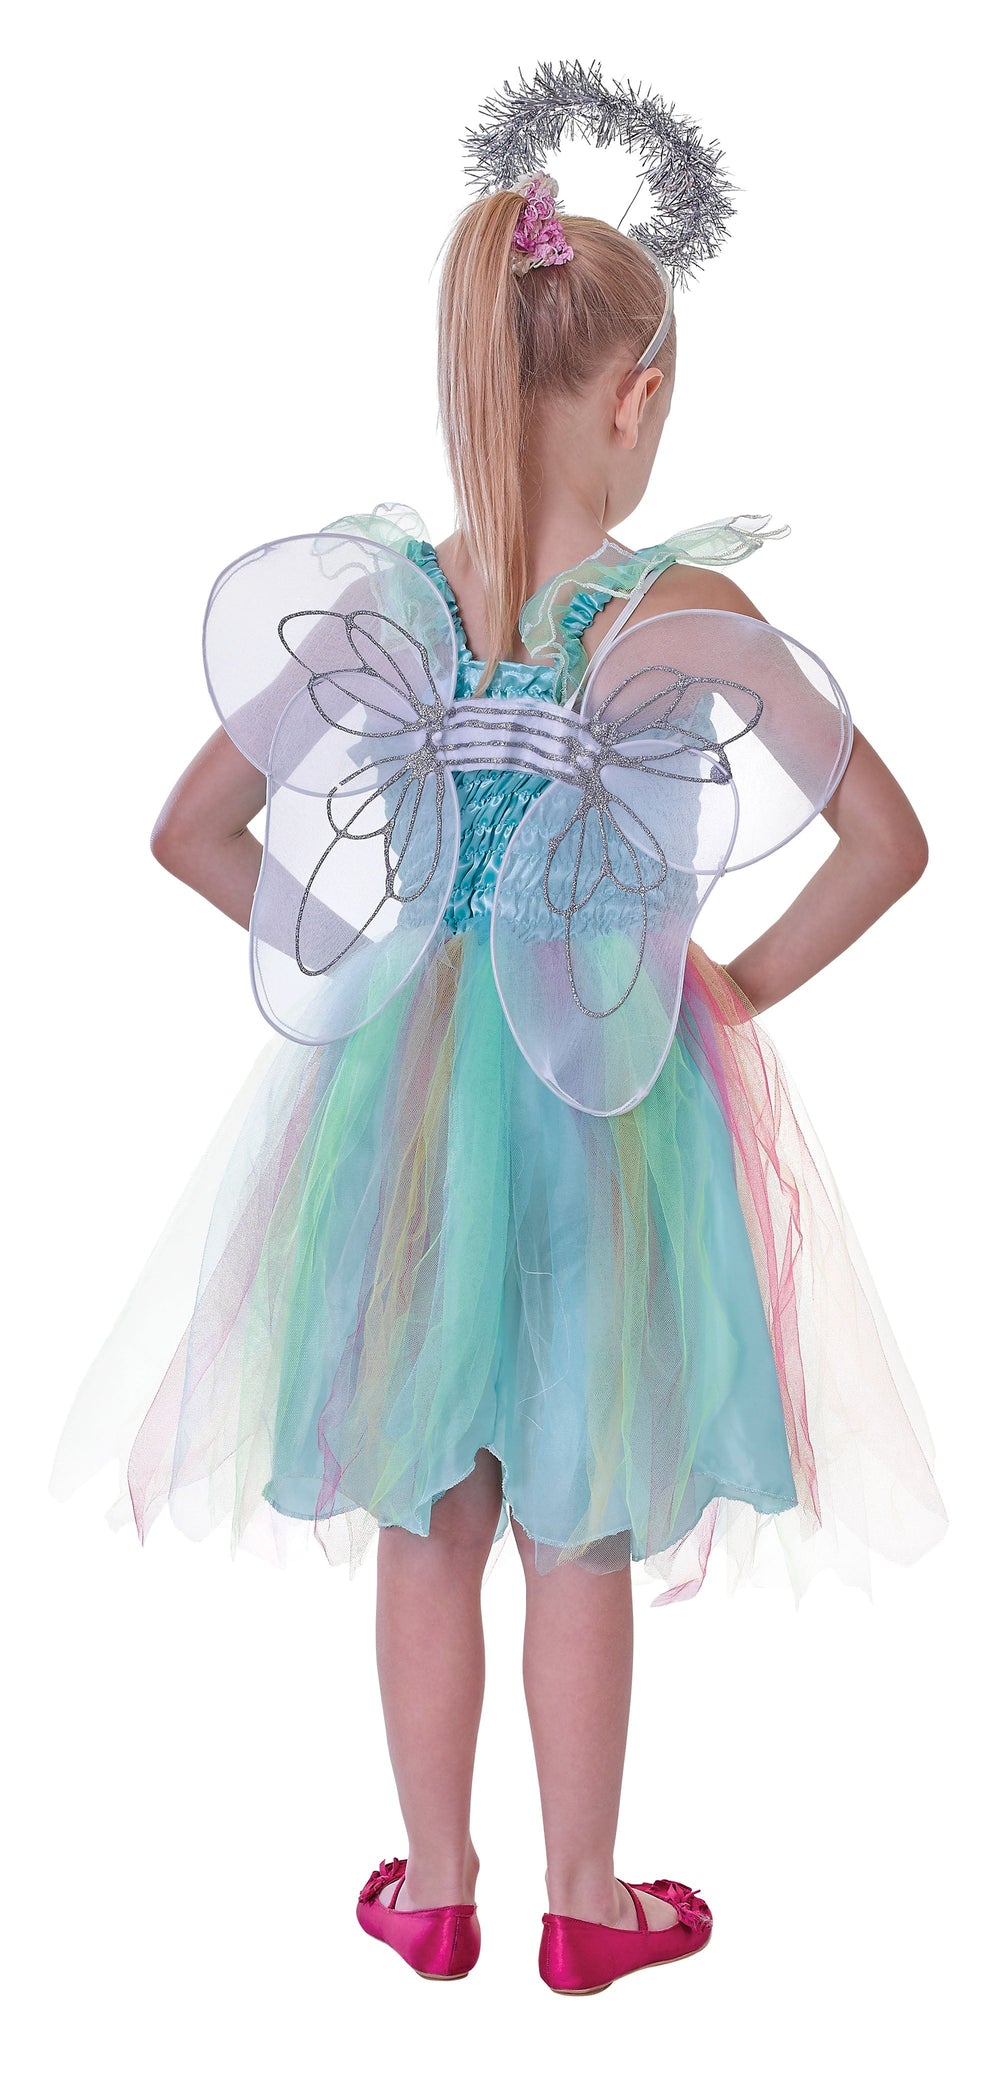 Angel kit  - Includes wings and halo